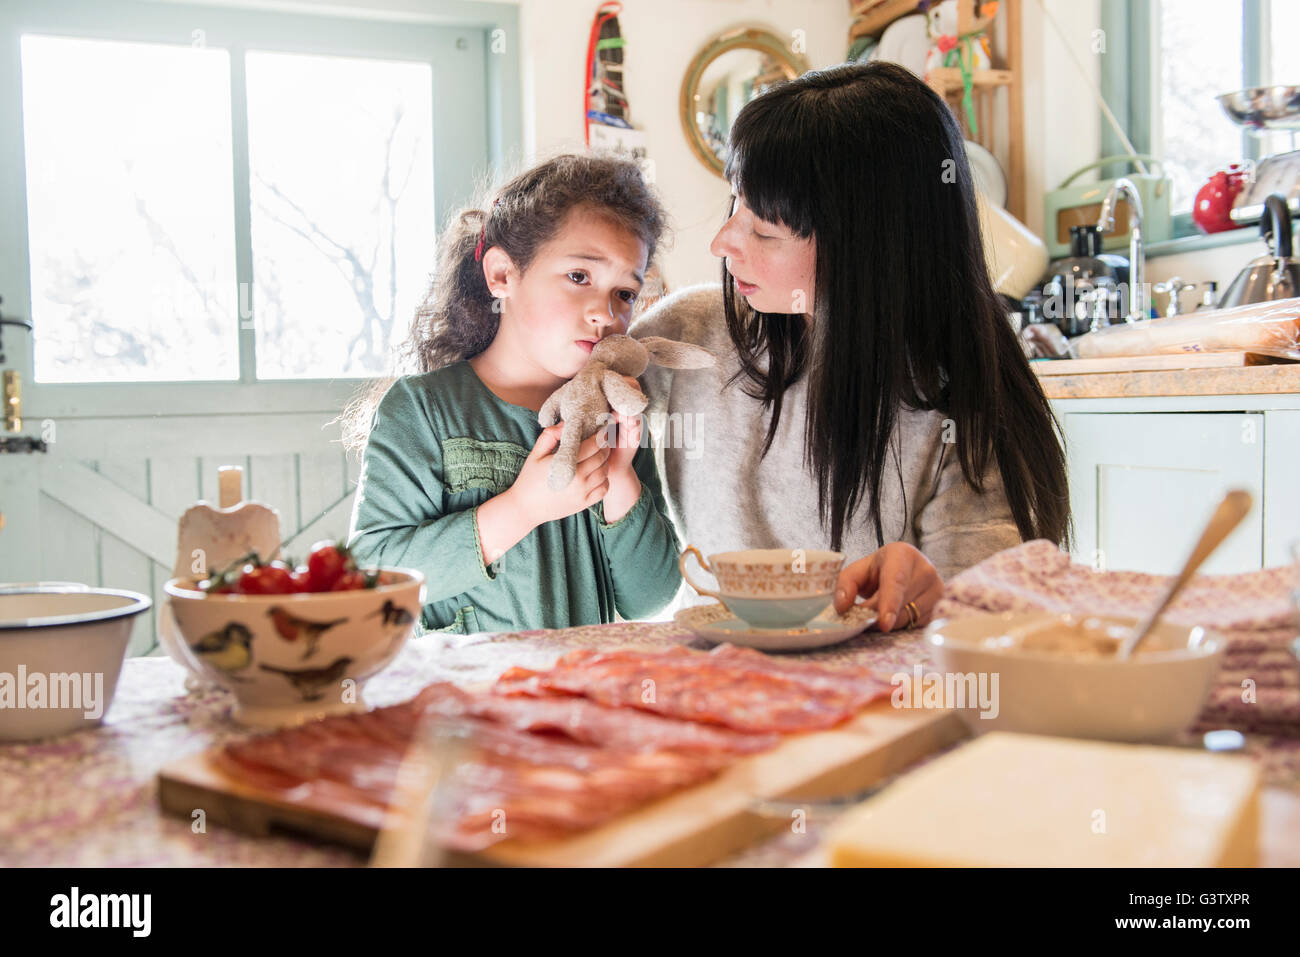 A six year old girl being comforted by her mother at the dinner table. Stock Photo